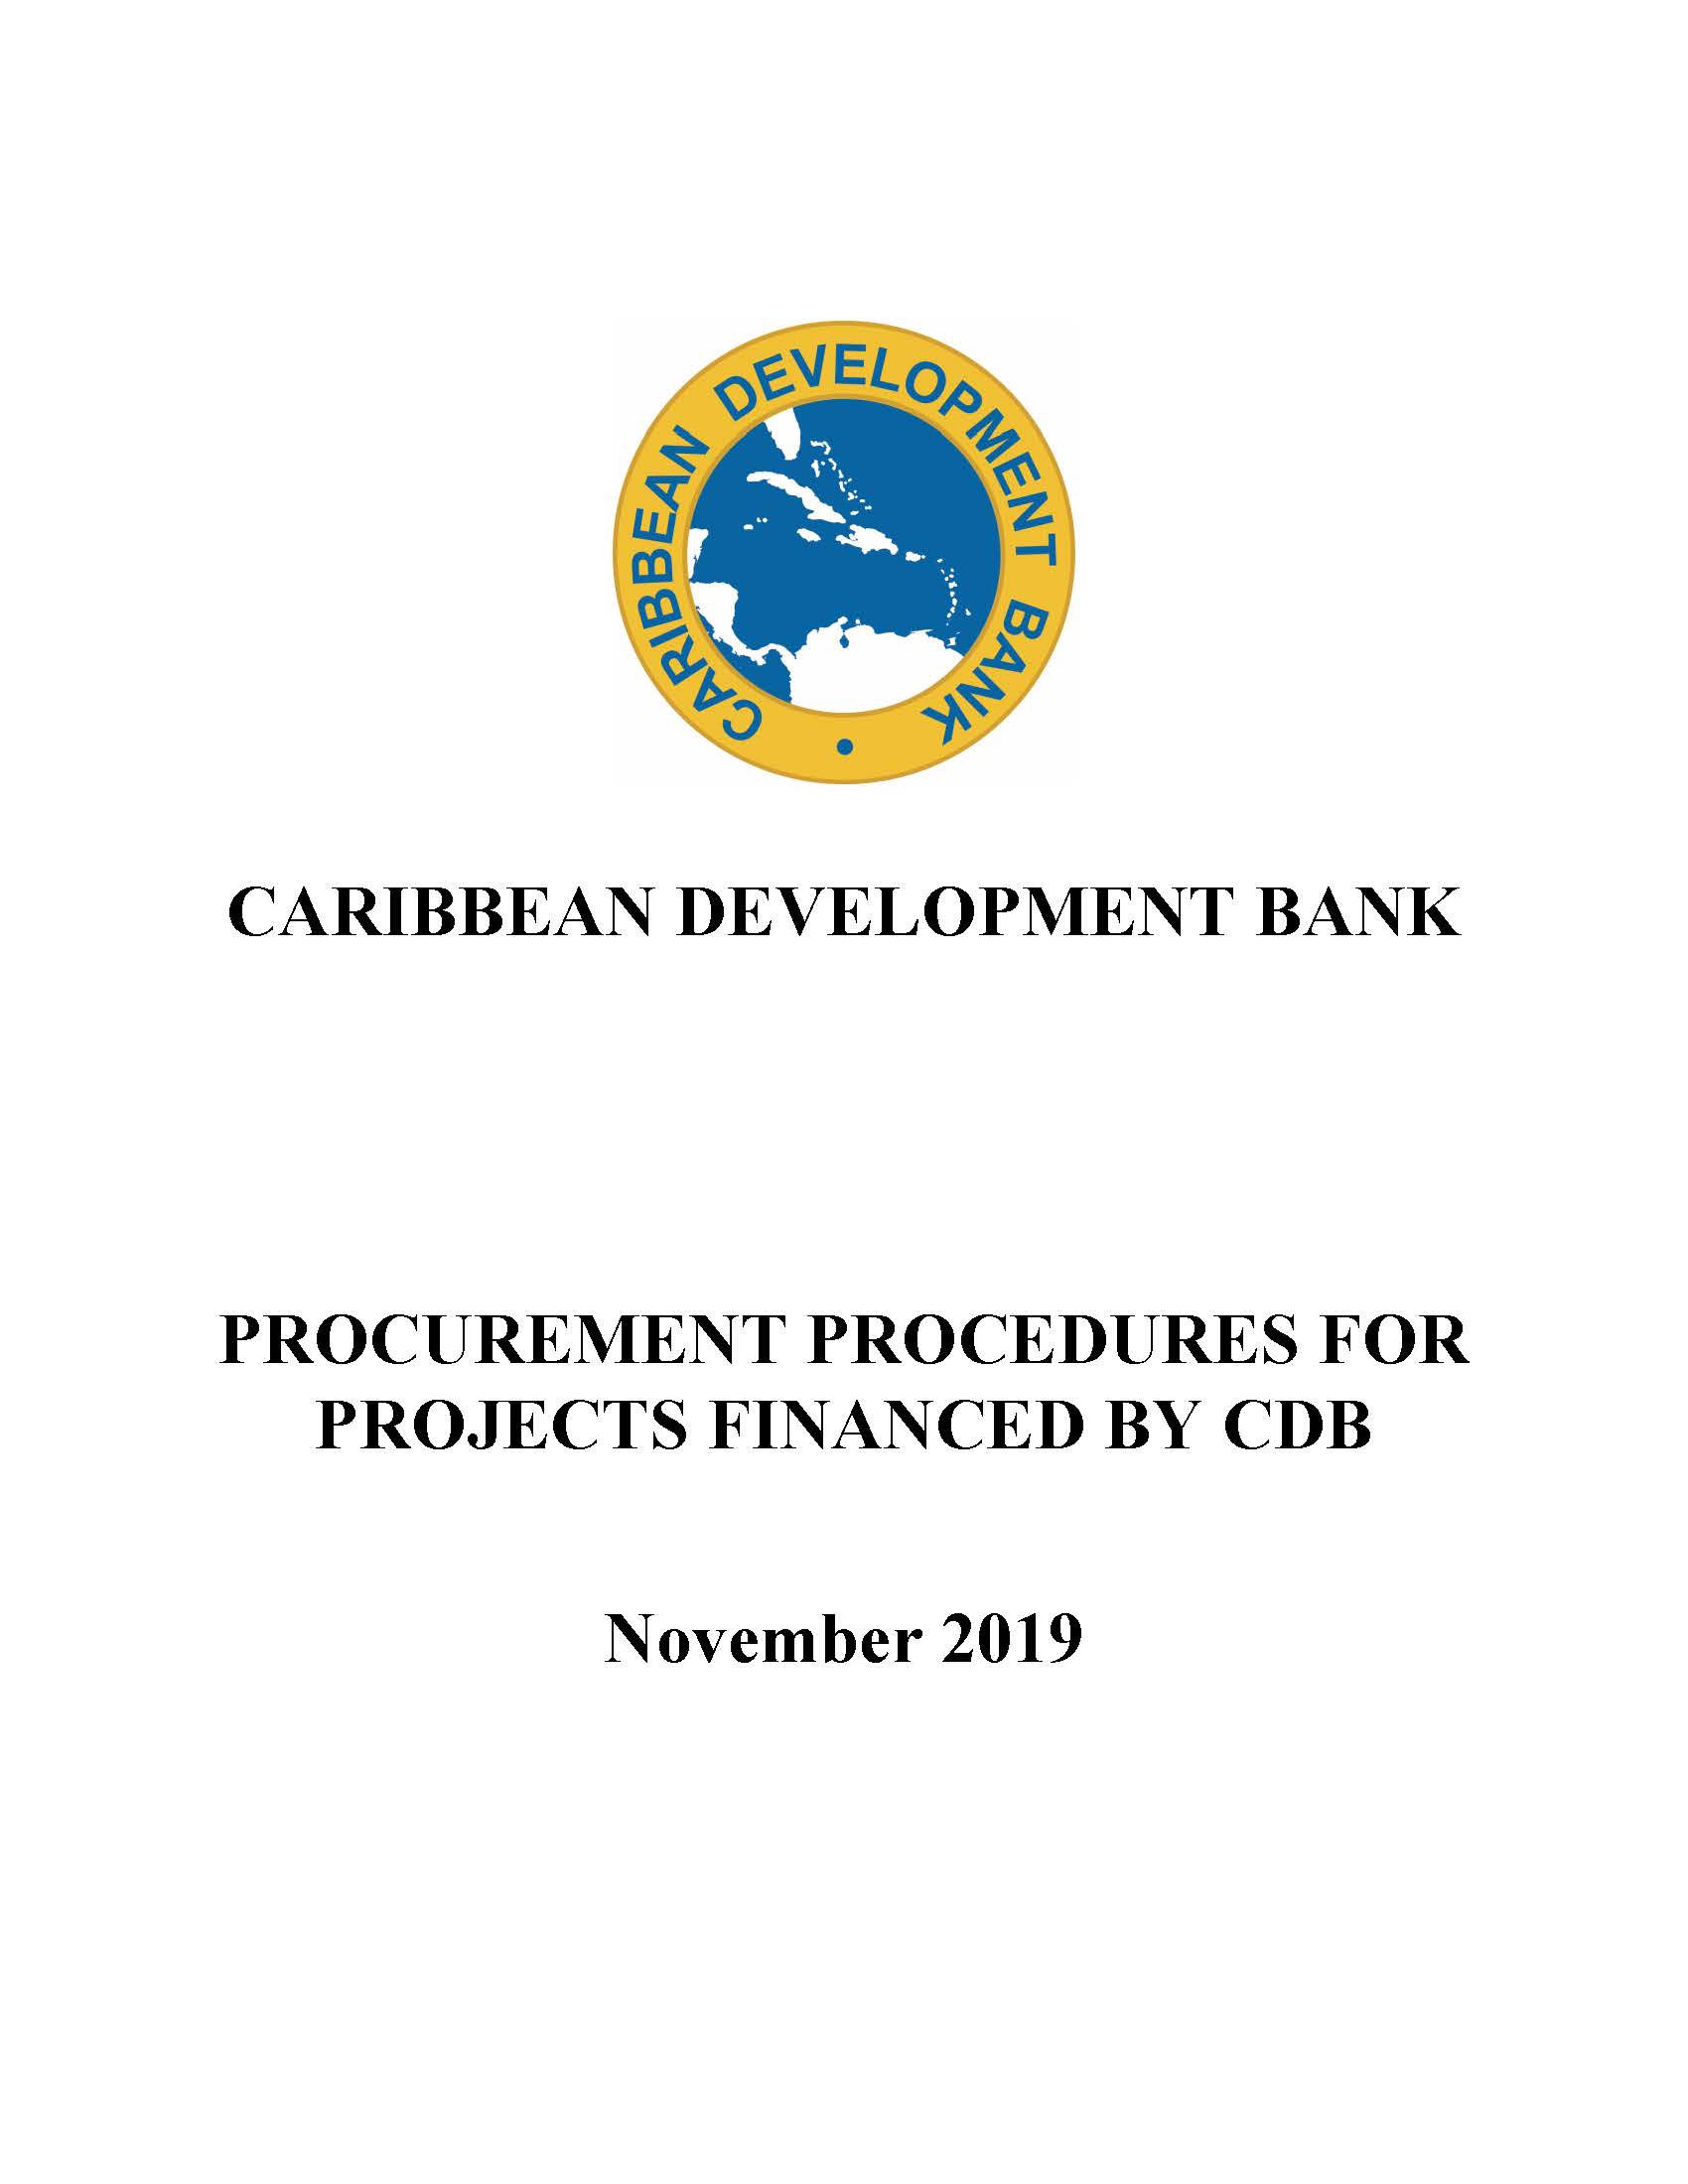 text-based cover showing CDB logo and document title